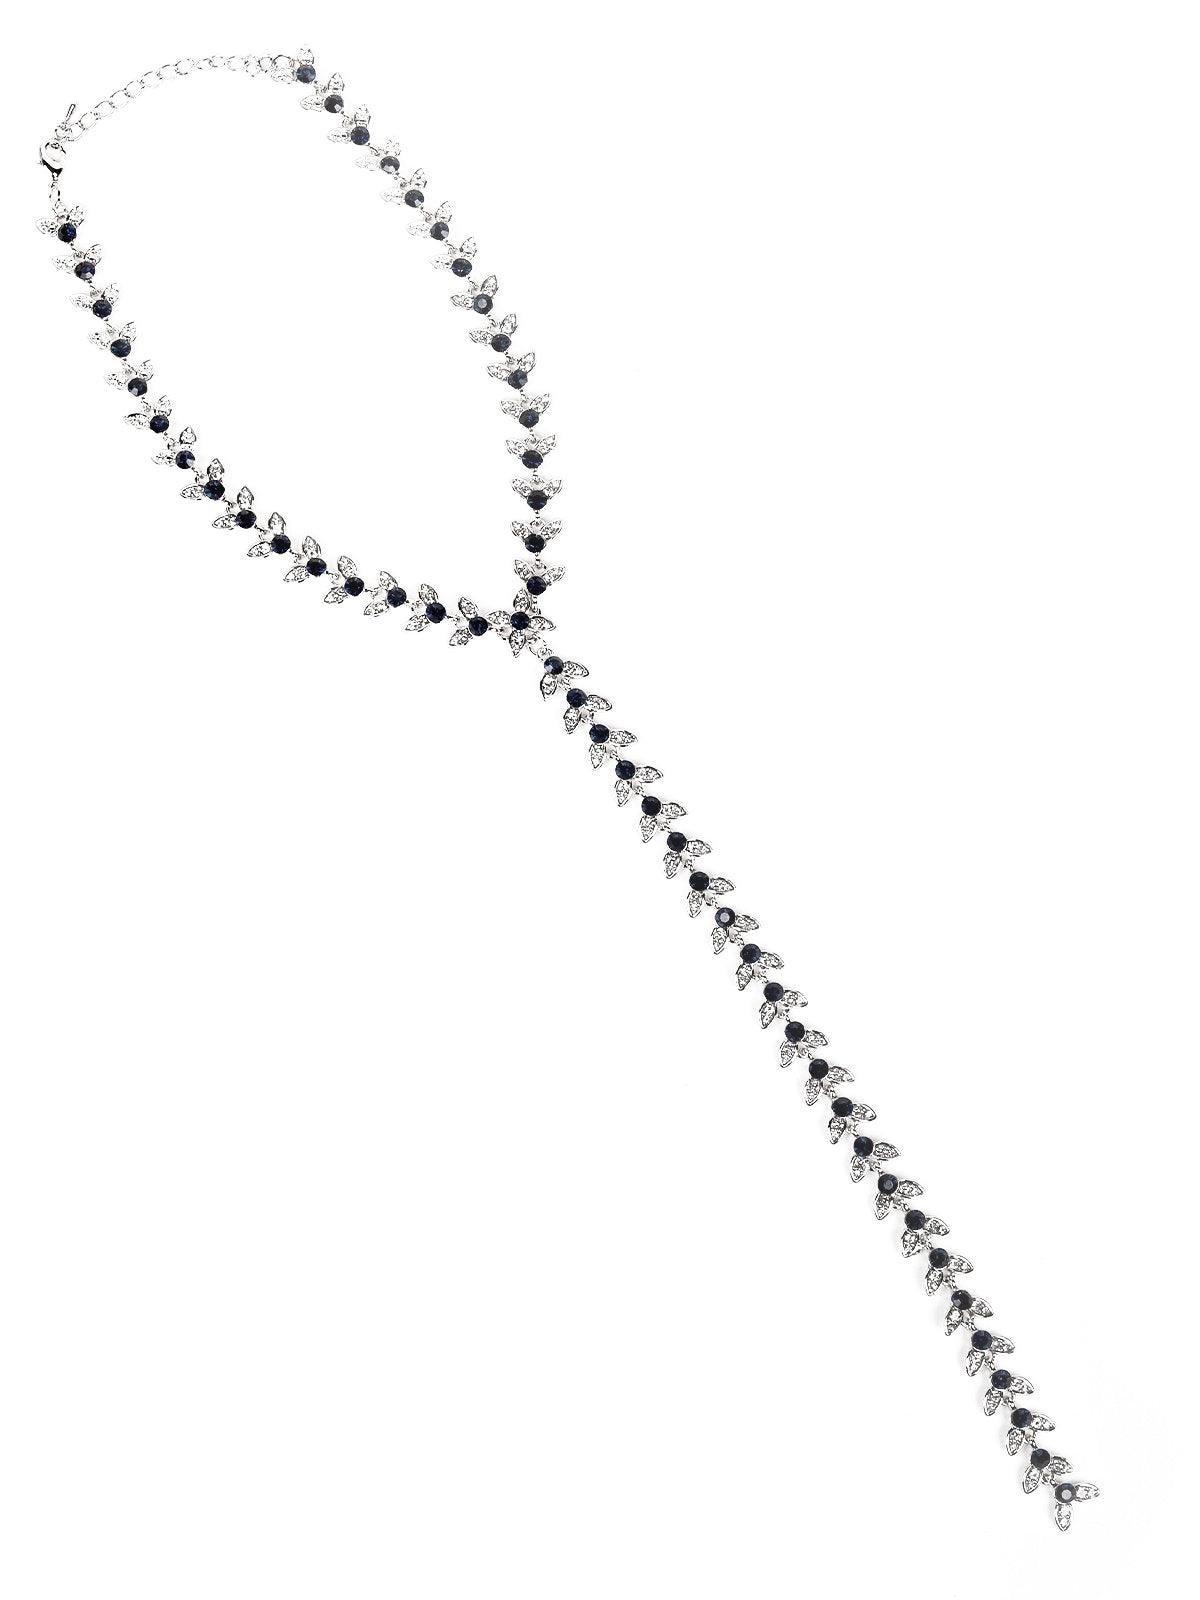 Women's Black Beads With Crystal Embellishments Lariat Necklace - Odette